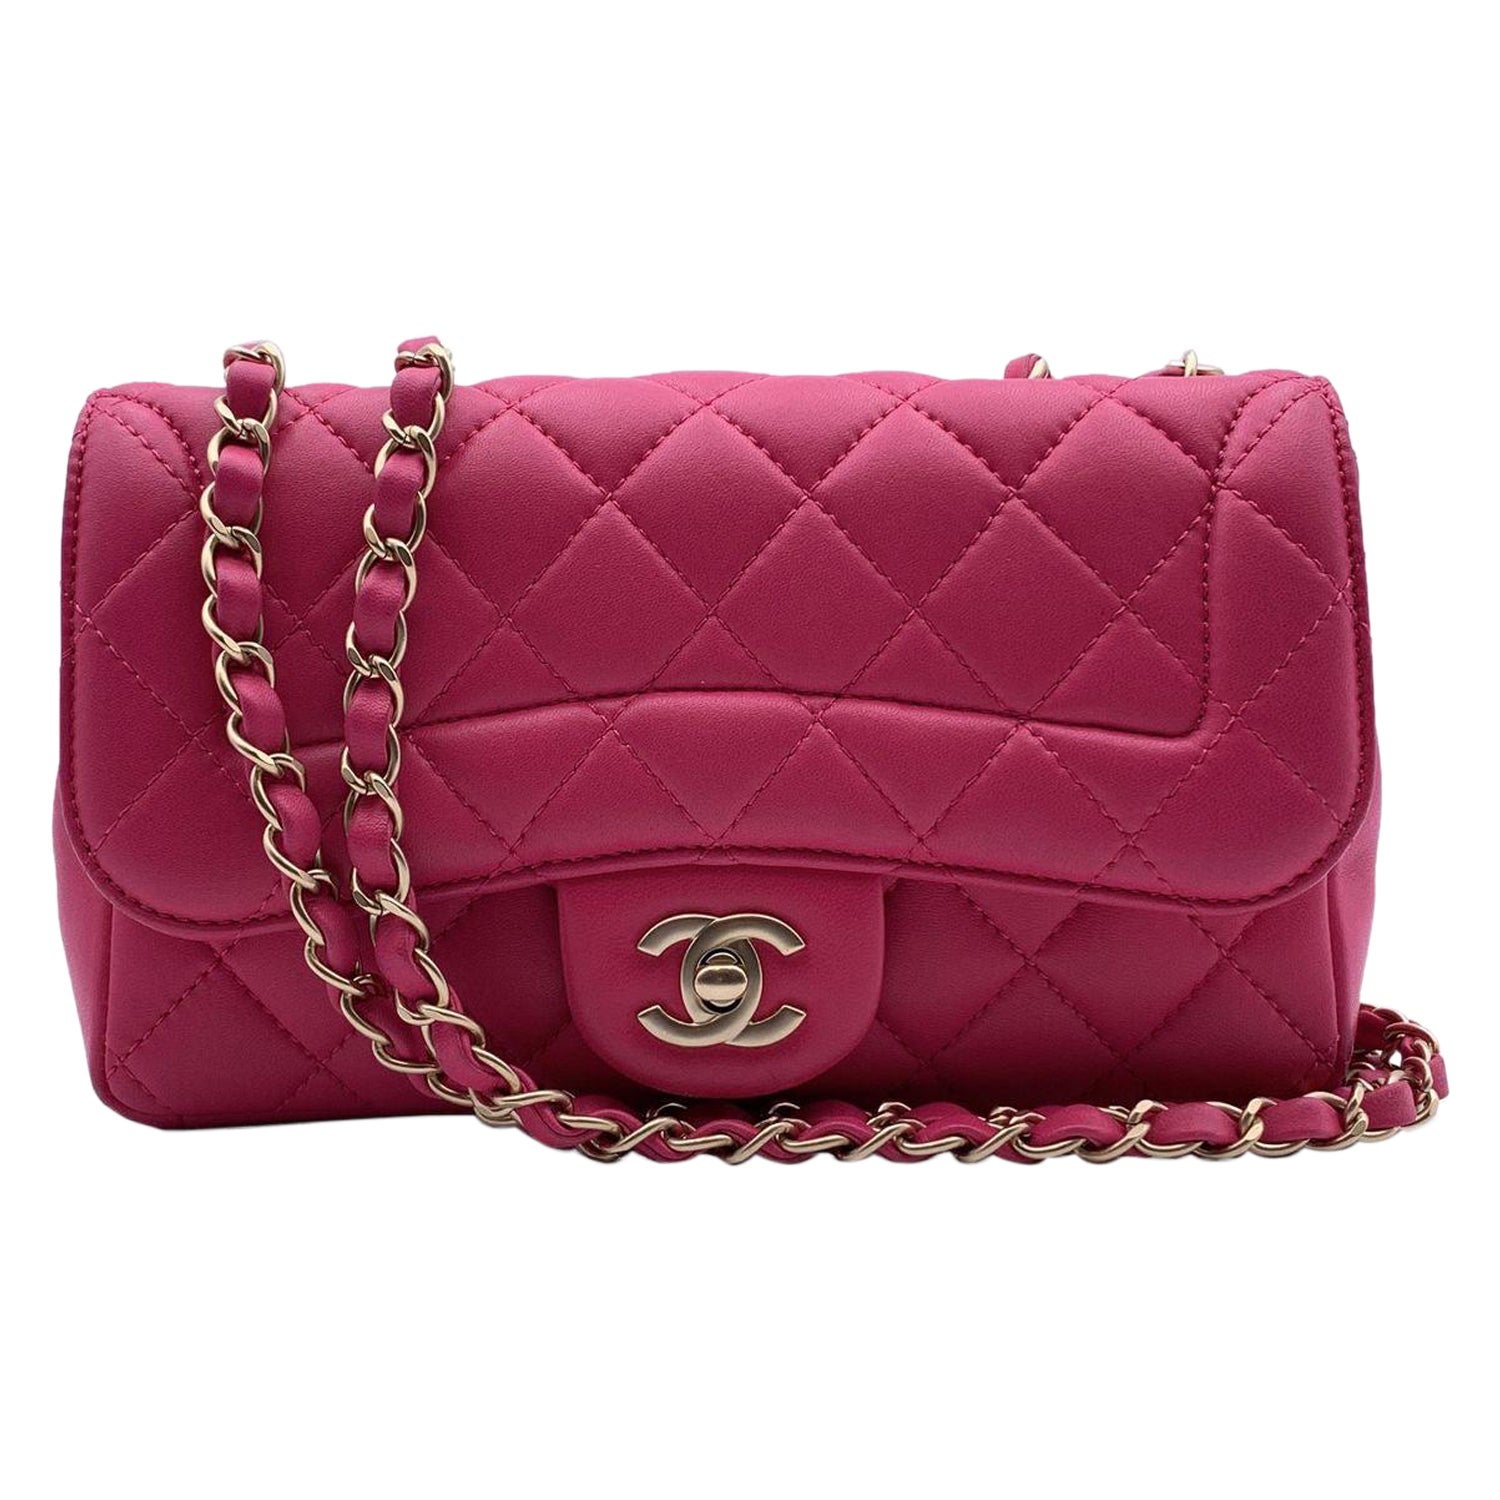 Chanel Pink Quilted Leather Mini Mademoiselle Chic Shoulder Bag For Sale